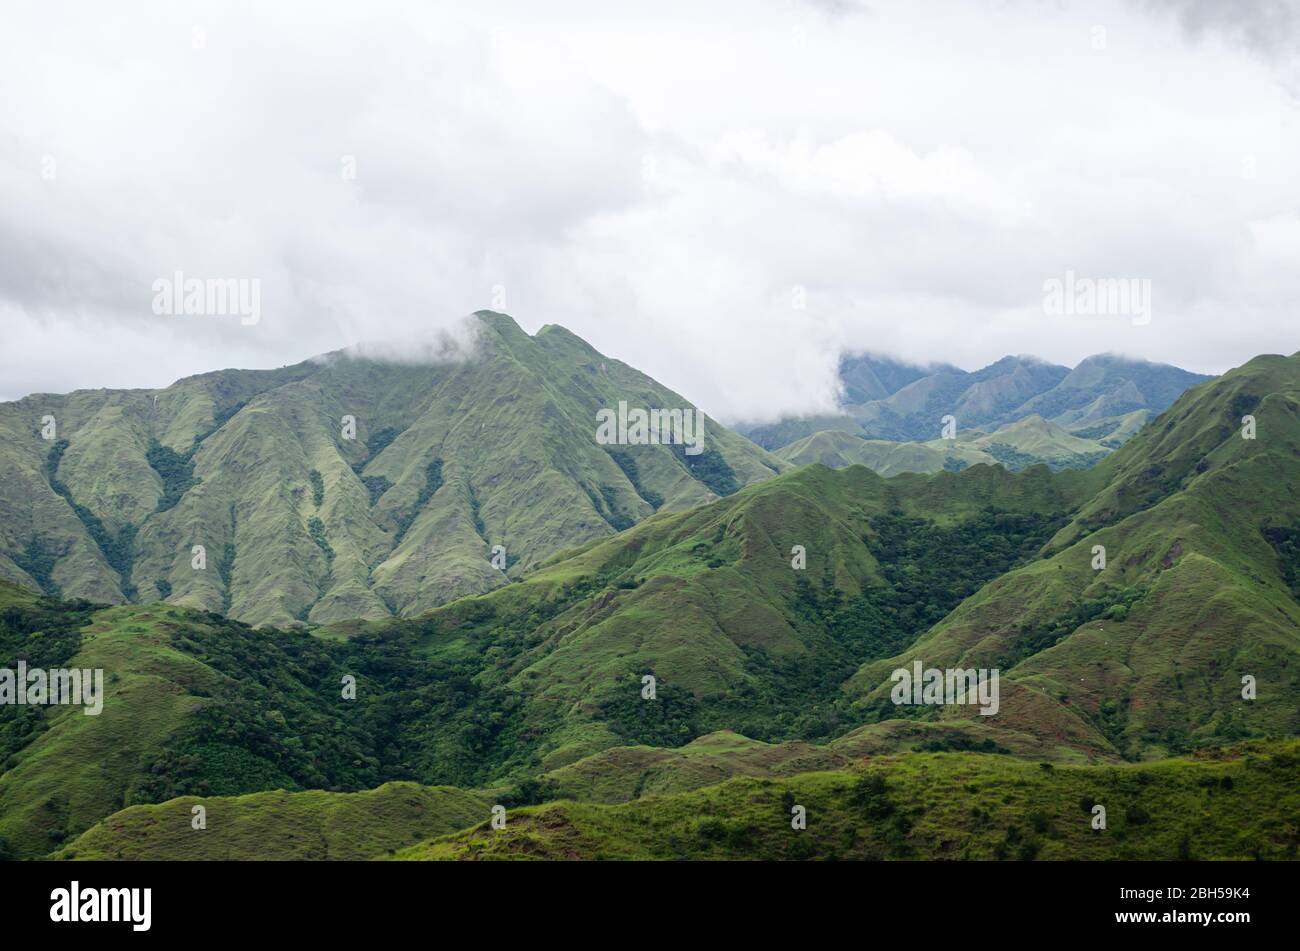 Panoramic view of the picturesque mountain landscape in Central Panama, showcasing lush green hills under a cloudy sky. Stock Photo